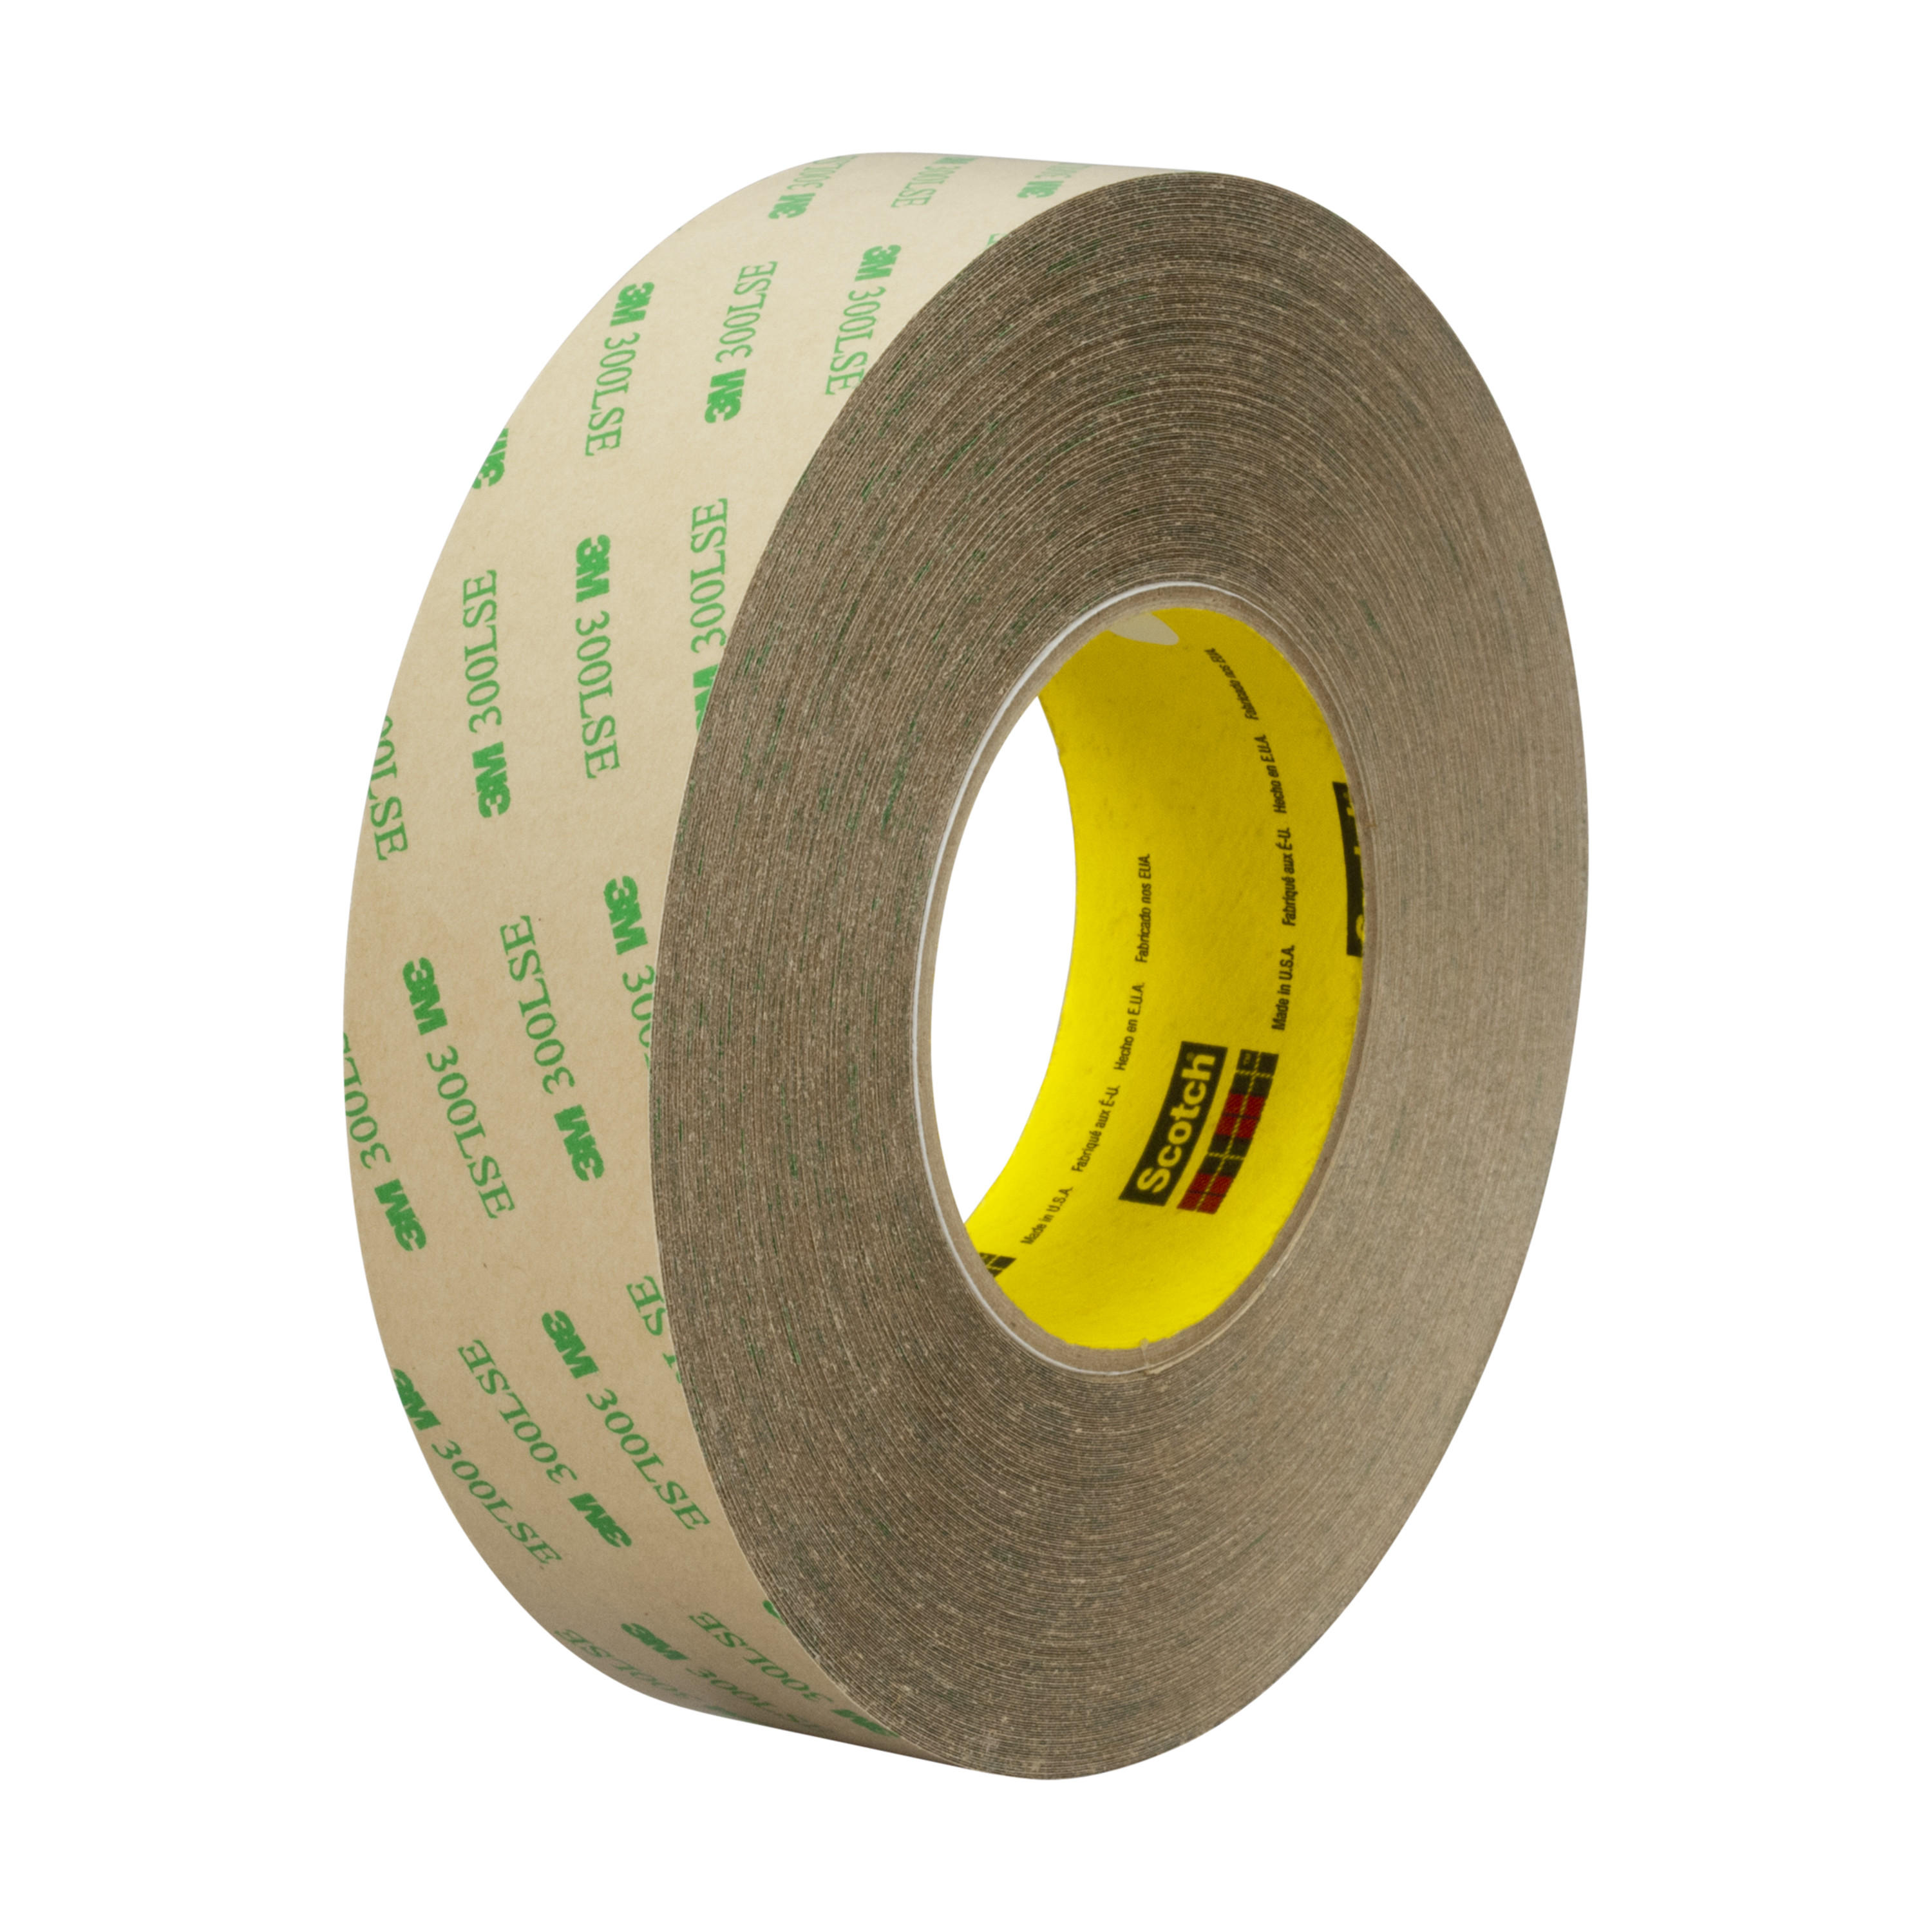 3M™ Adhesive Transfer Tape 9672LE, Clear, 24 in x 180 yd, 5 mil, 1 roll
per case